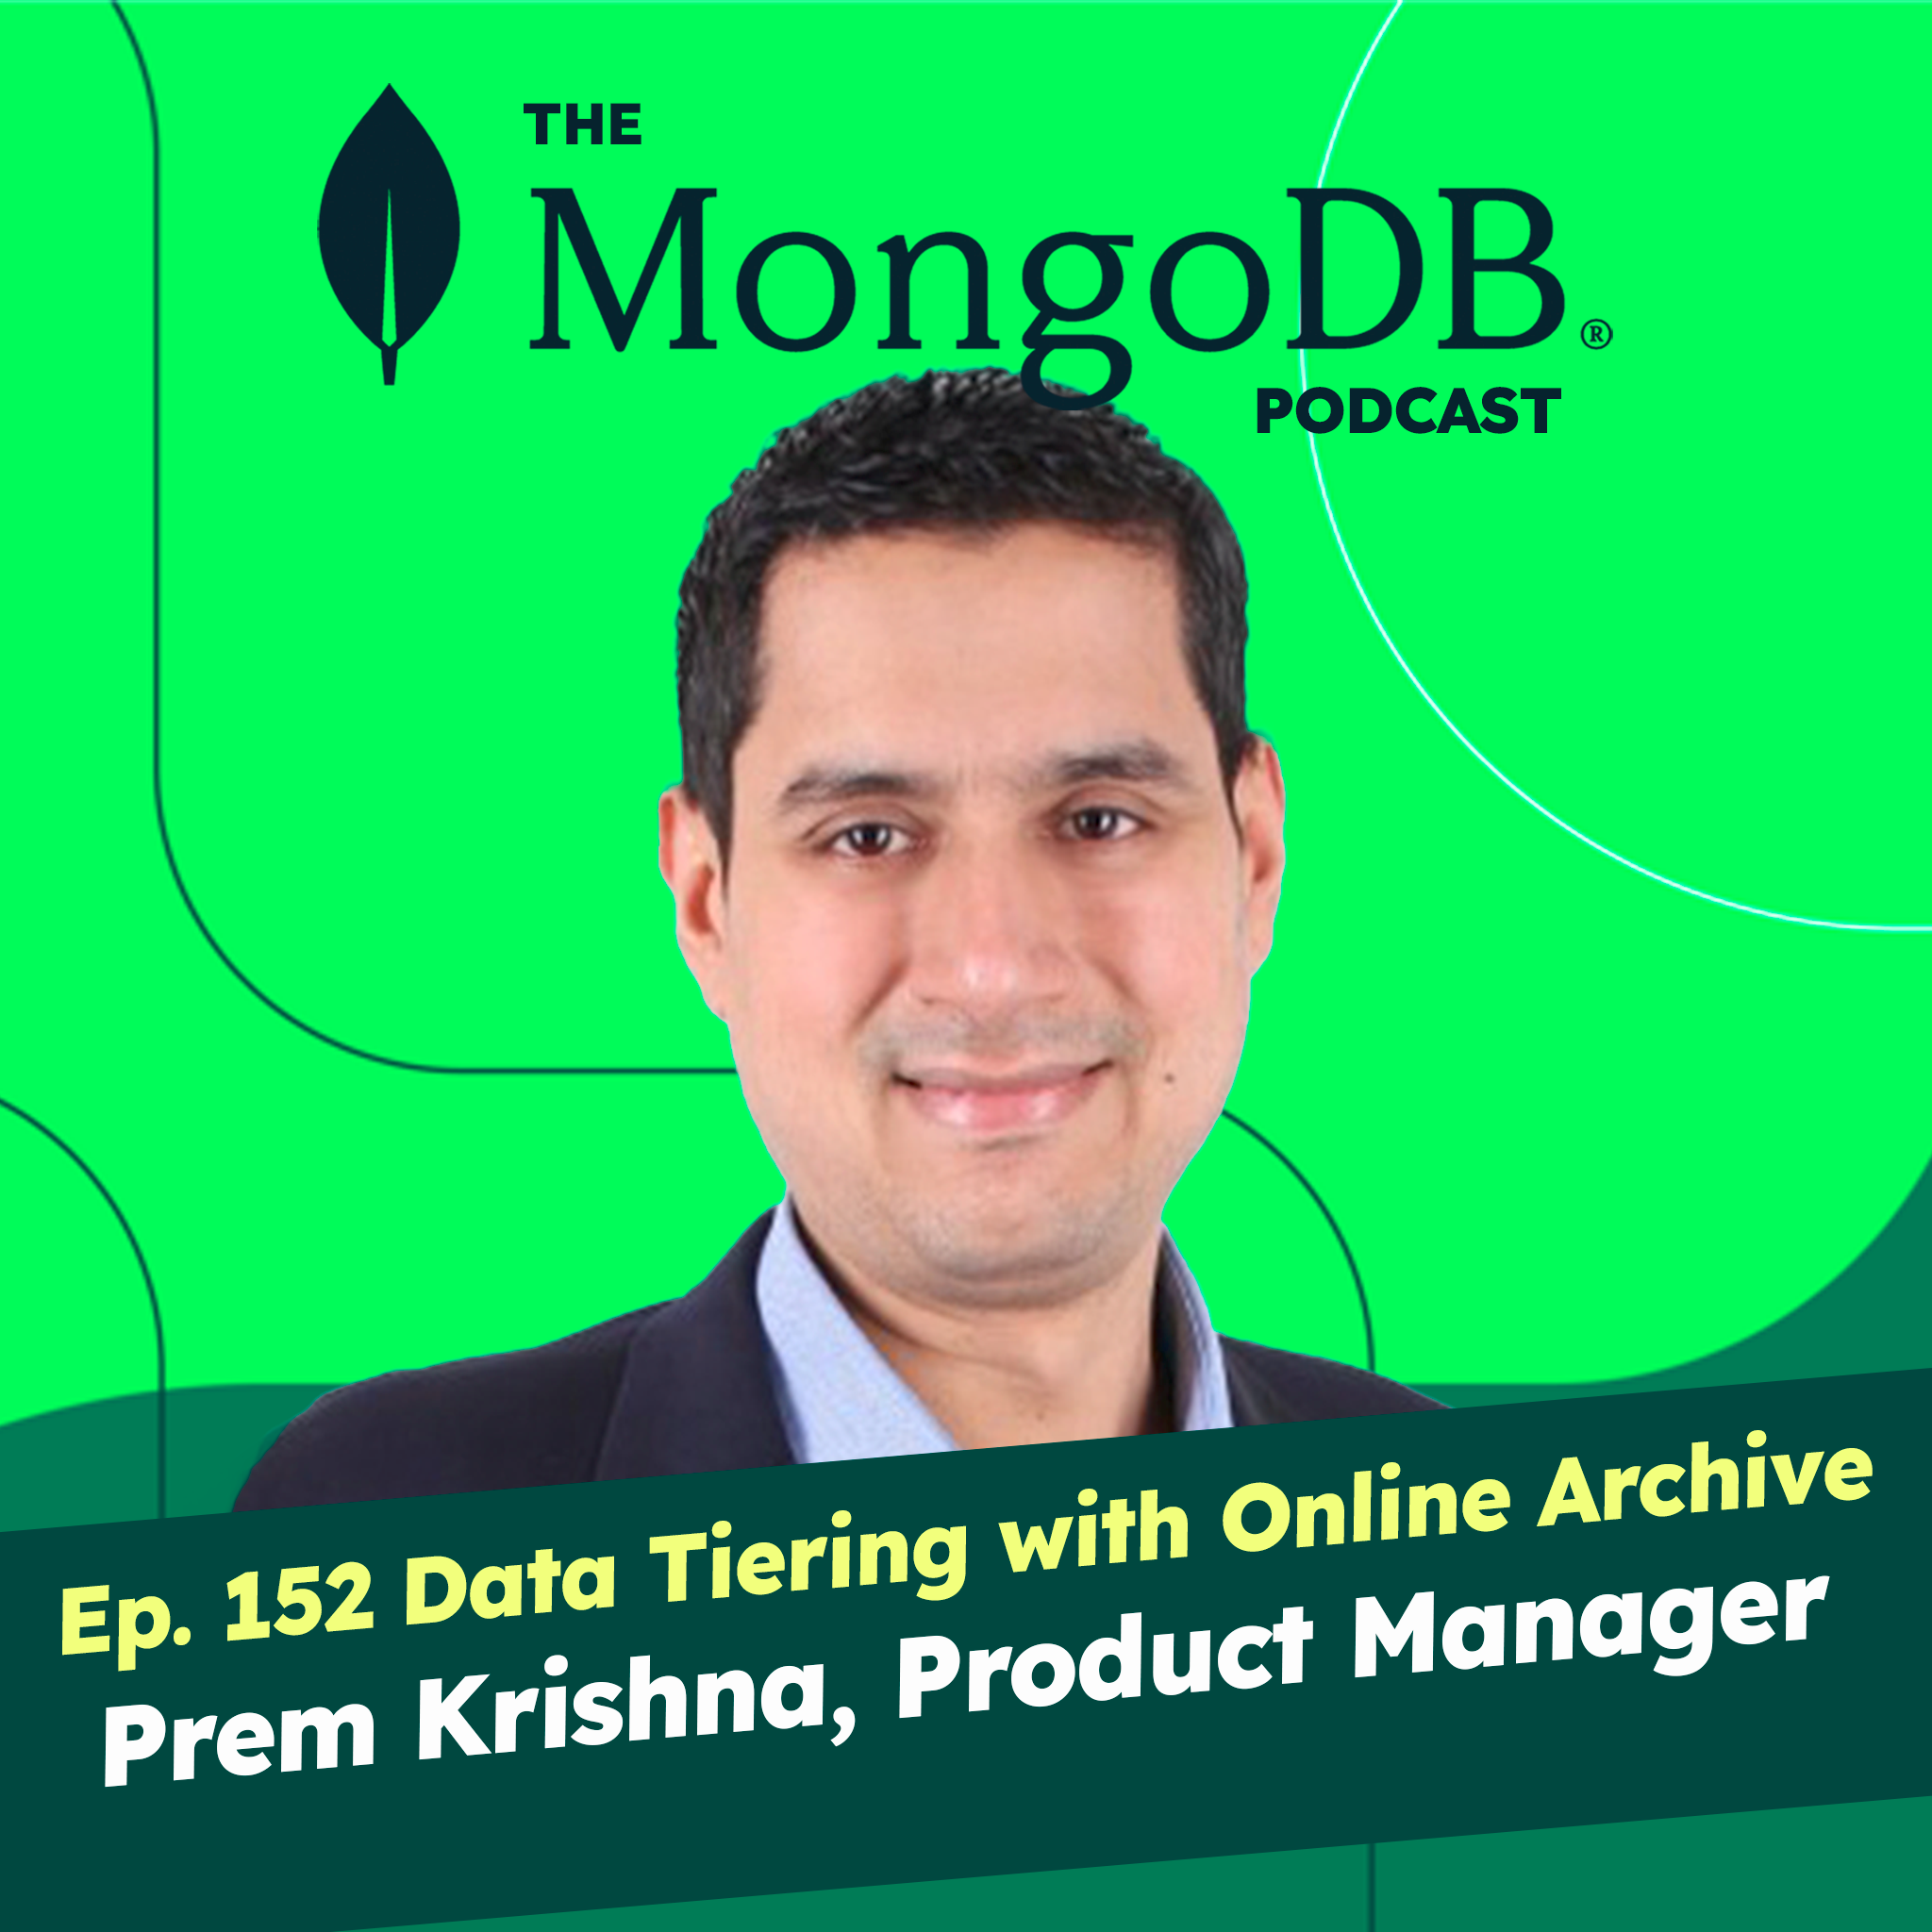 Ep. 152 Data Tiering using Online Archive with Prem Krishna